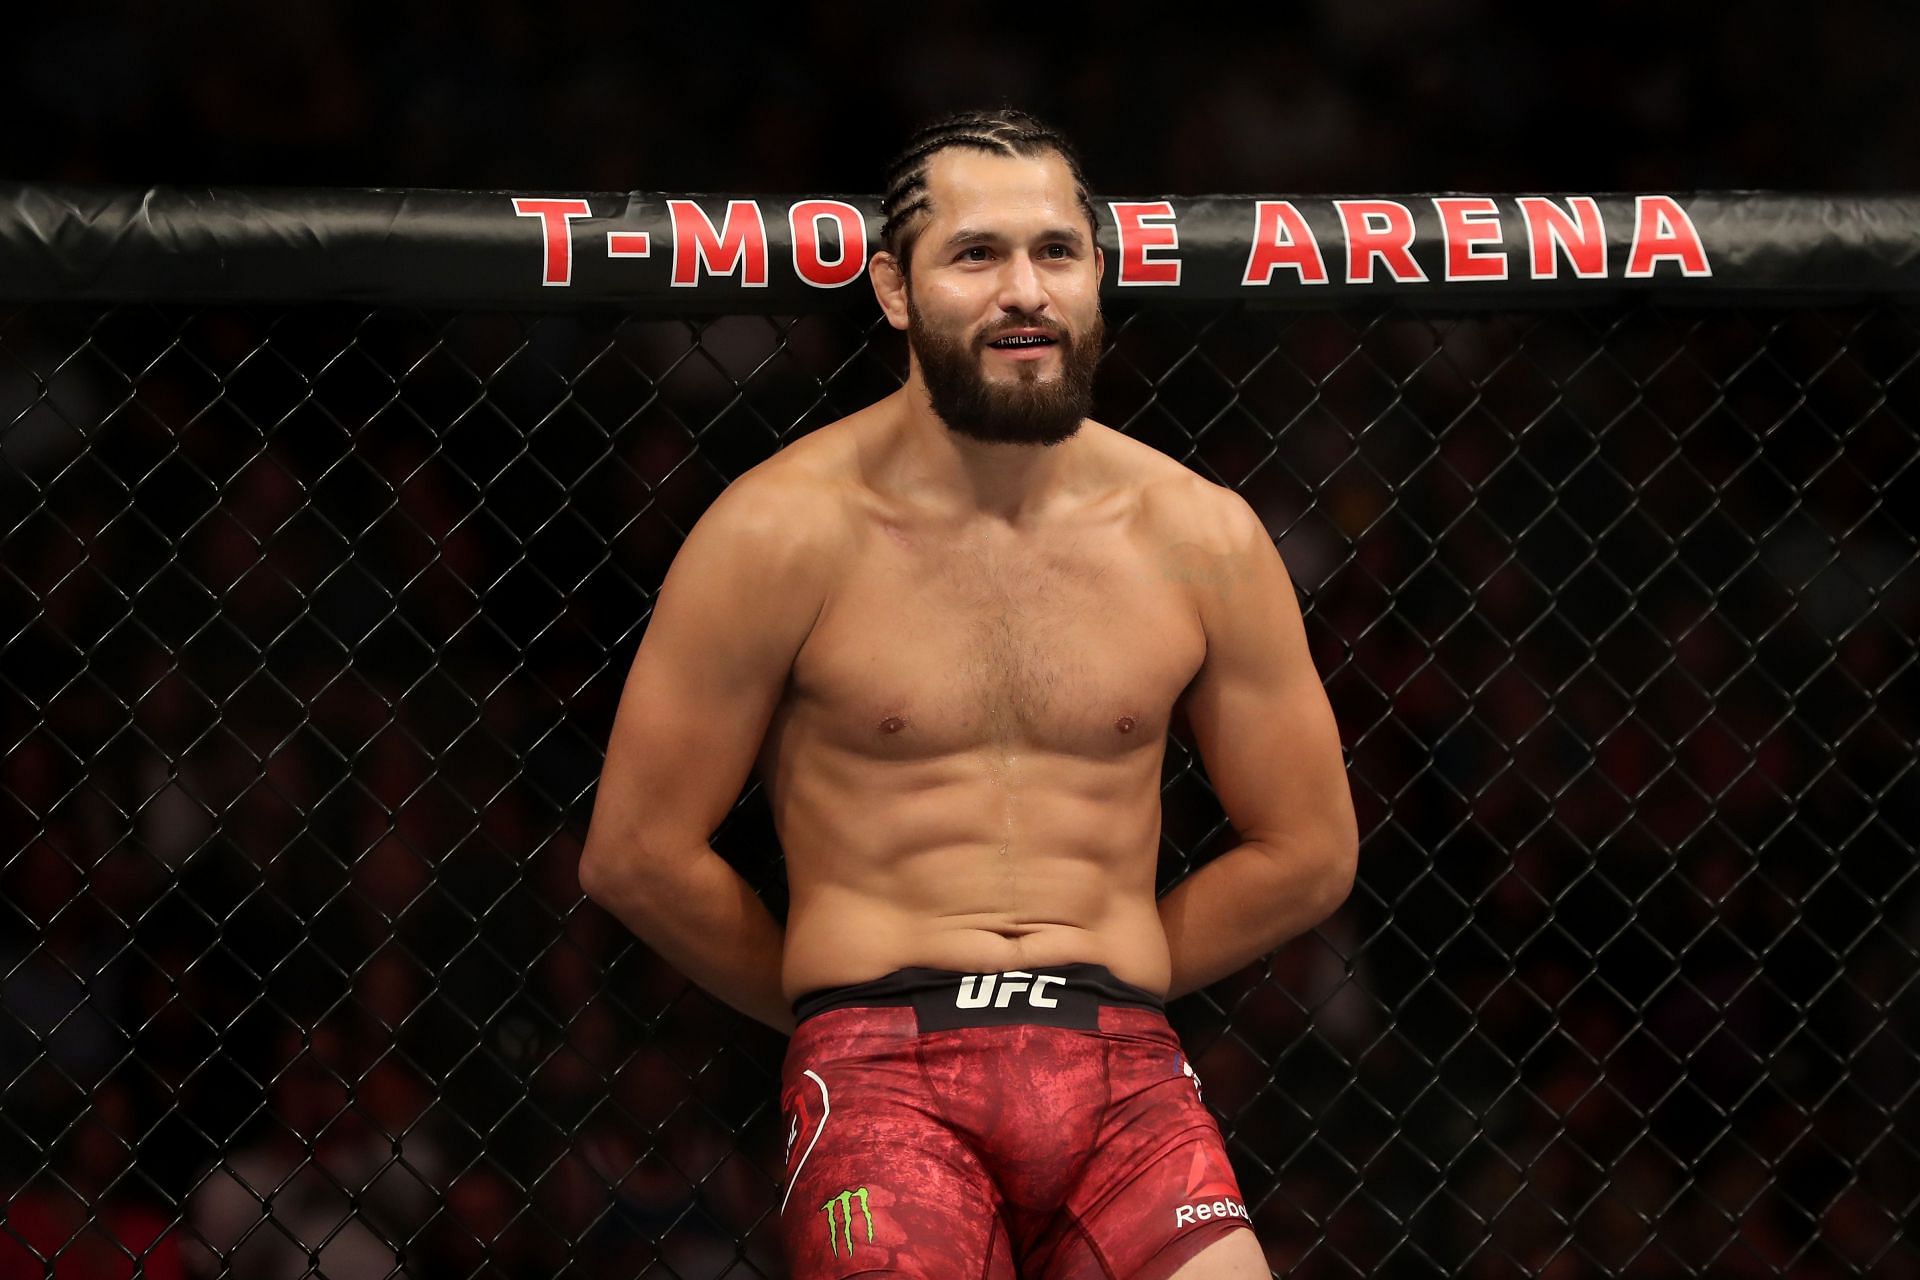 Masvidal holds a professional record of 35-15